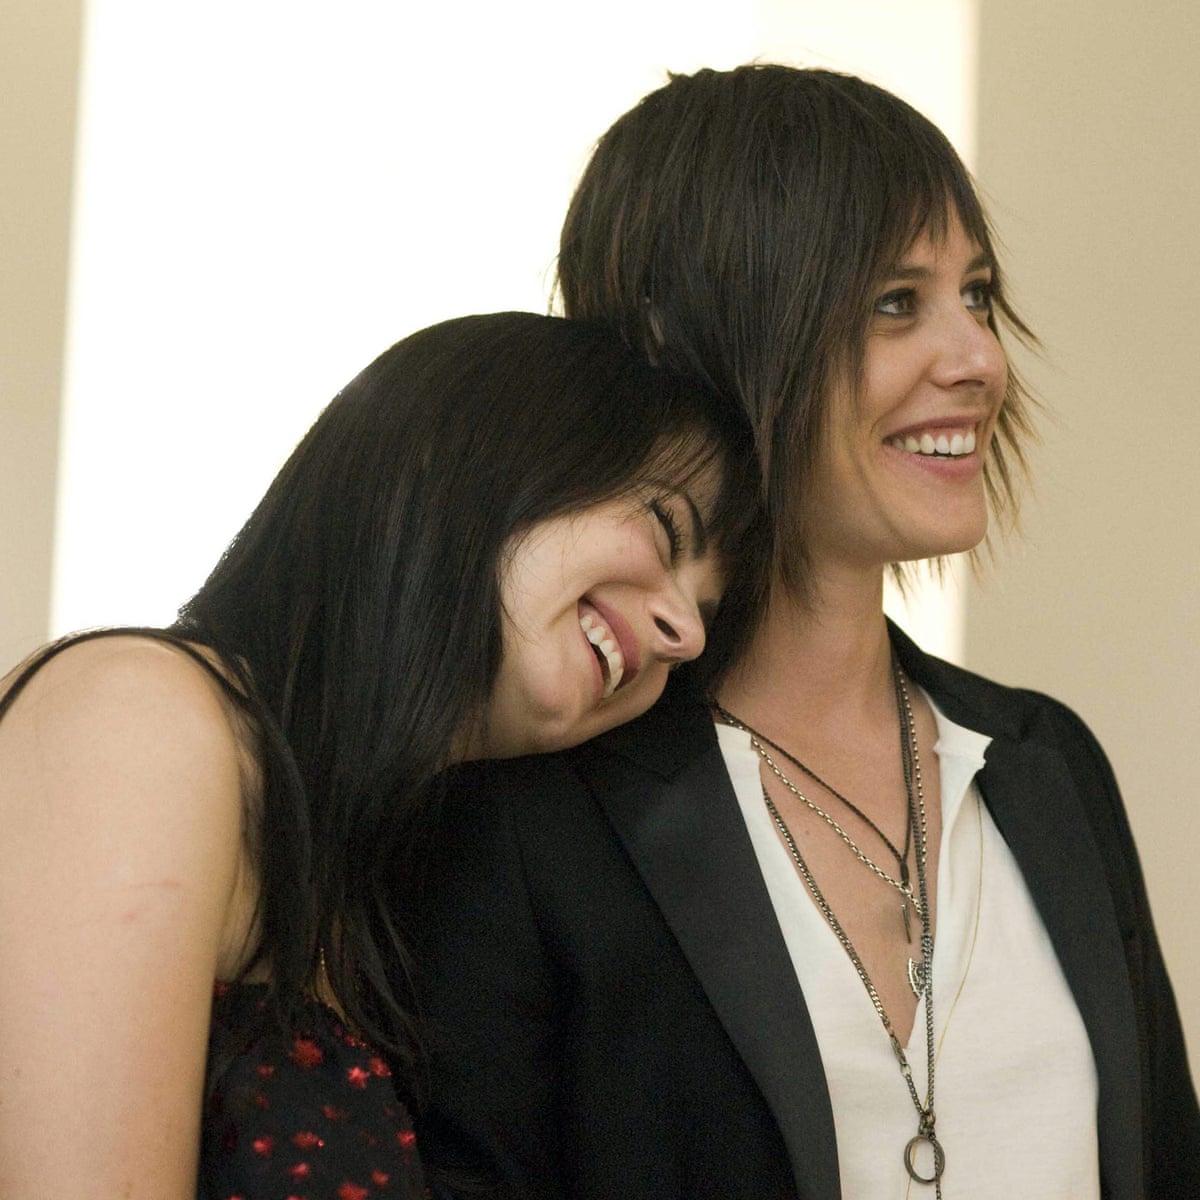 Leather vests at the ready! The L Word is coming back